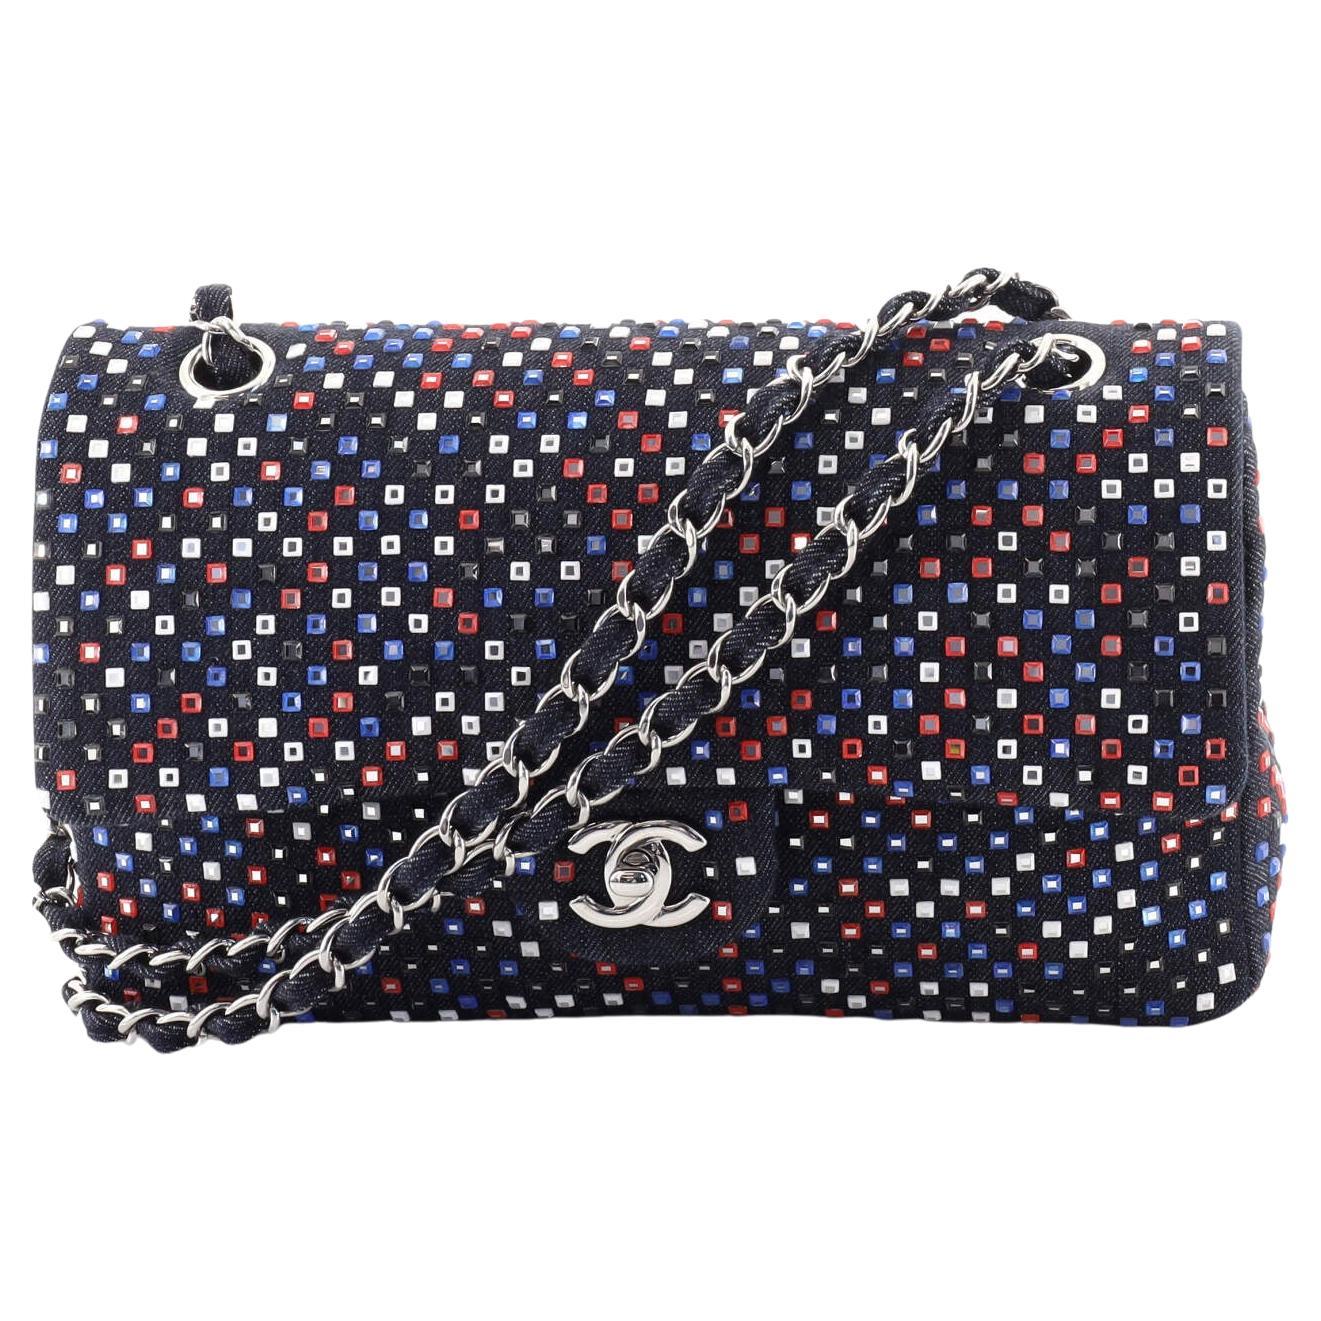 Chanel Classic Double Flap Bag Strass Embellished Denim